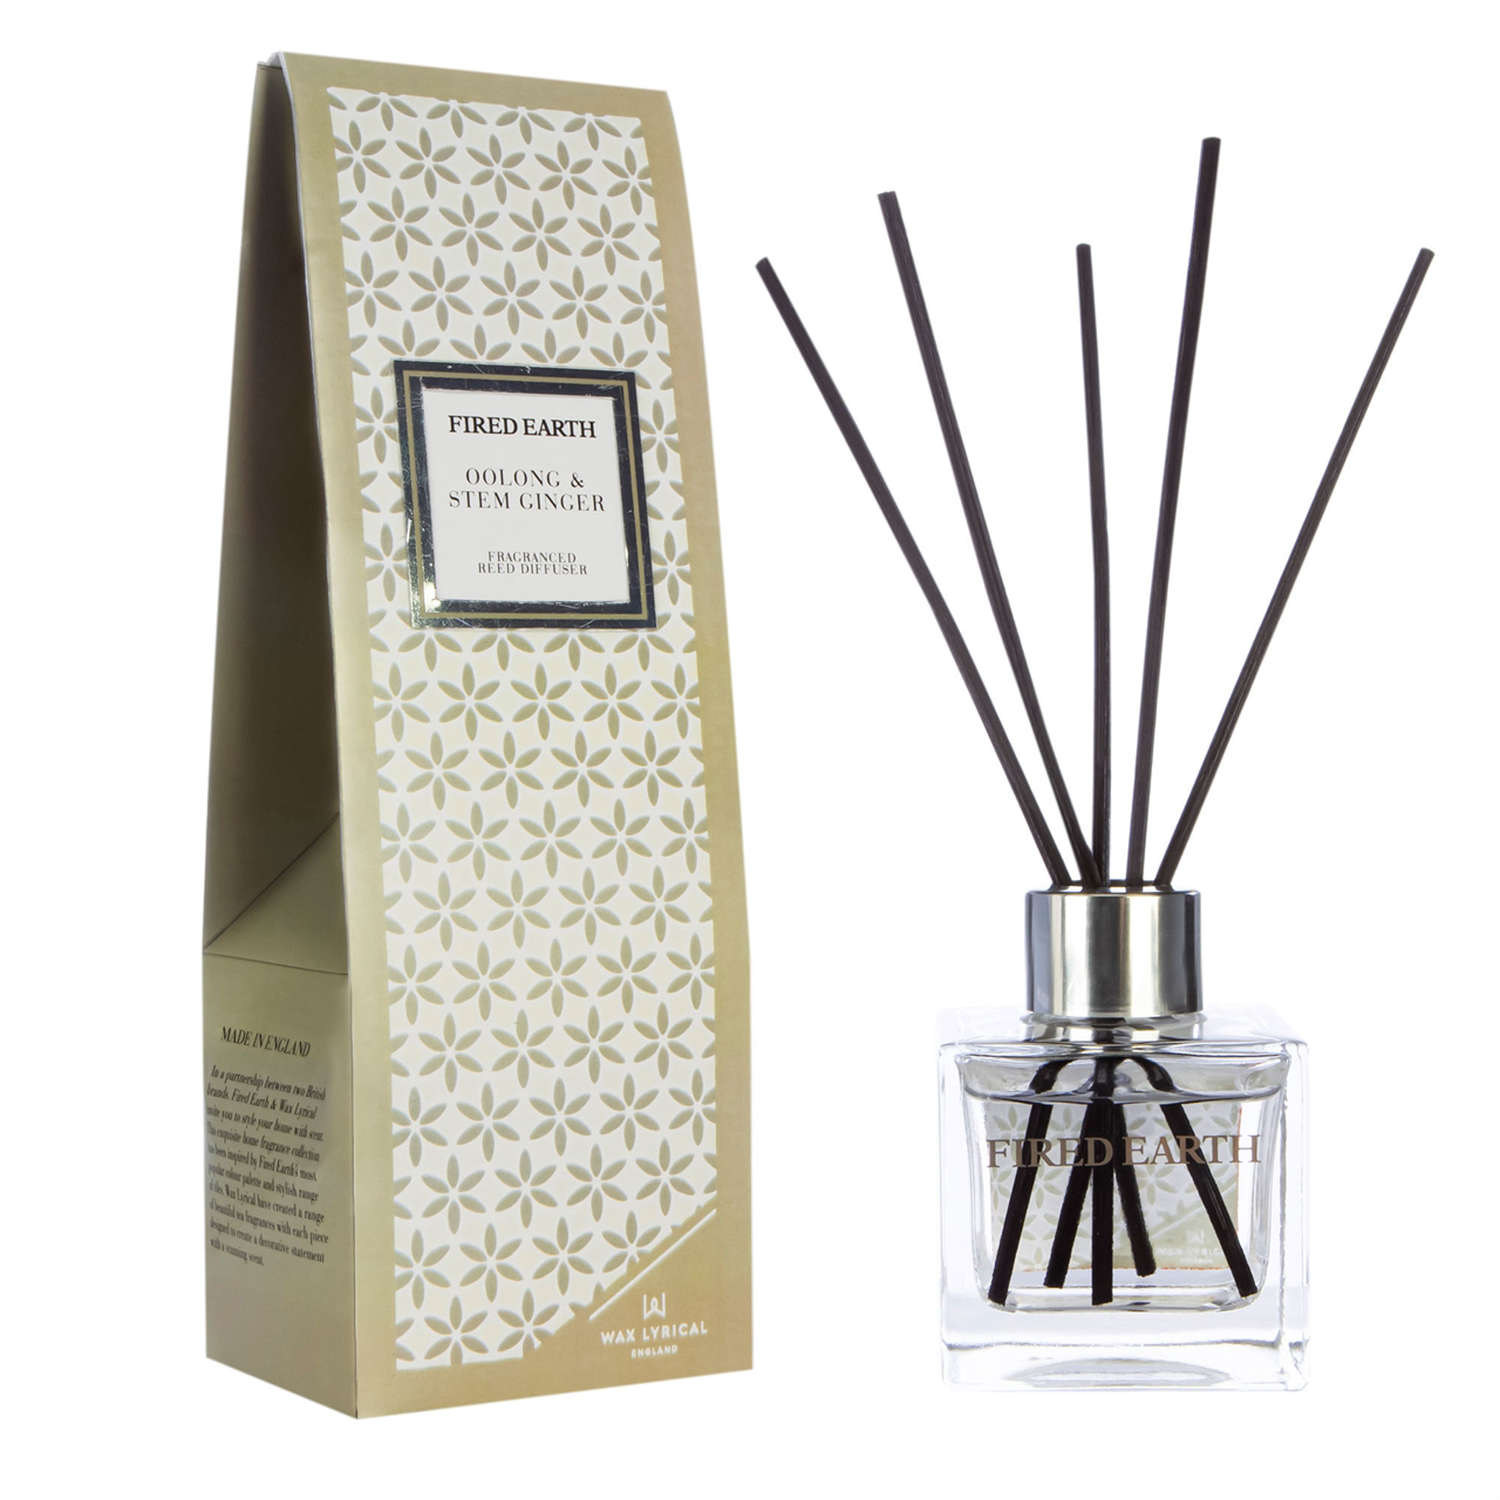 Fired Earth Oolong & Stem Ginger reed diffuser